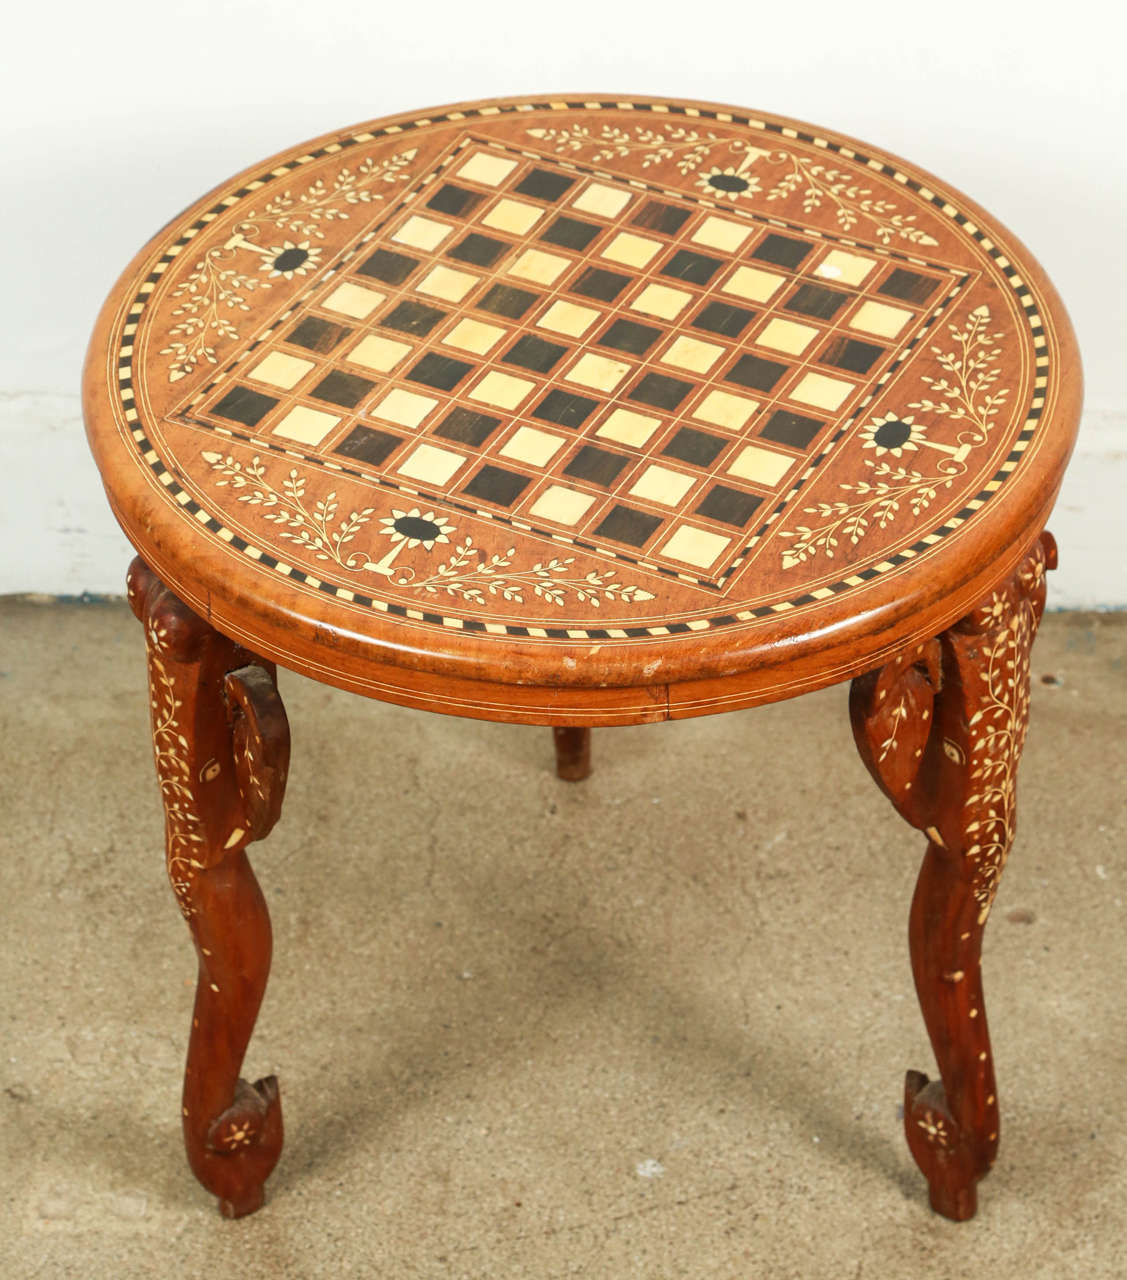 Mid-20th Century Anglo Indian Side Table Inlaid with Mother-of-Pearl and Elephant Head